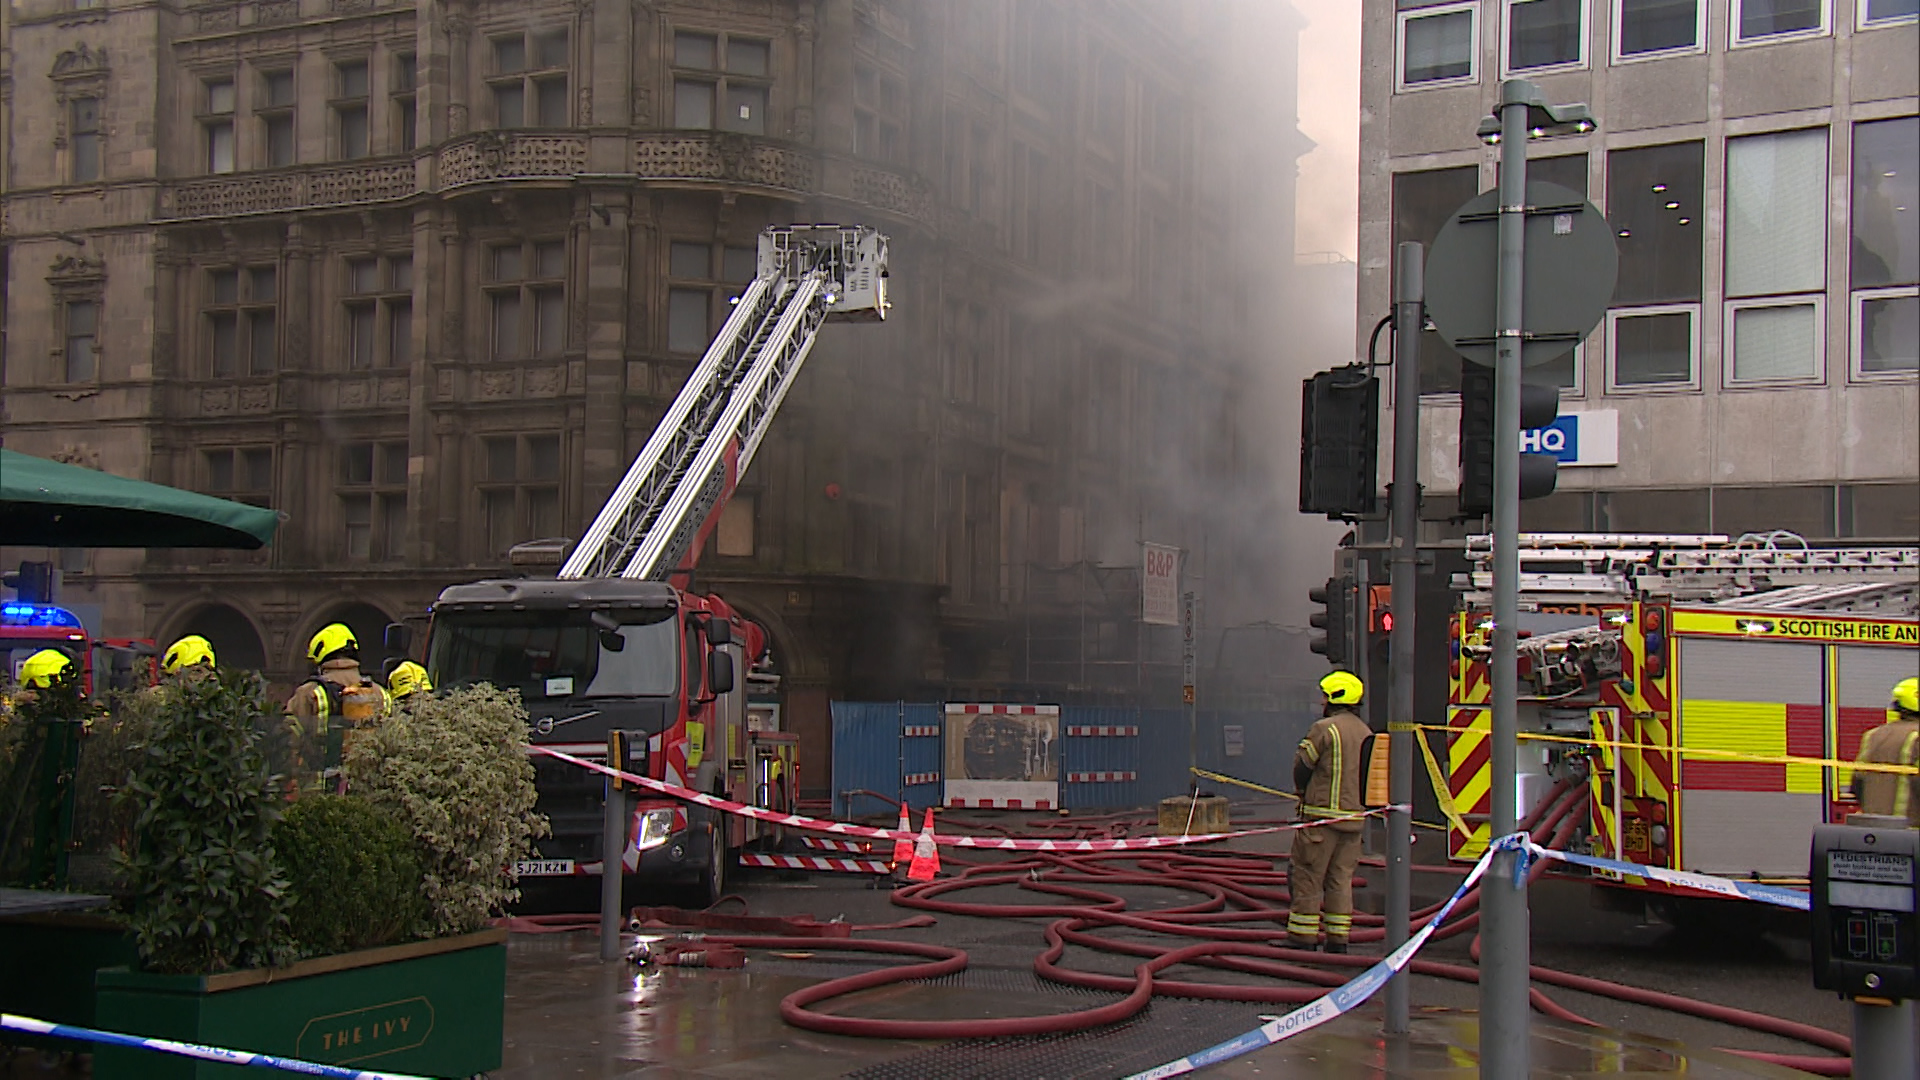 Smoke was seen billowing from the building across St Andrew Square.